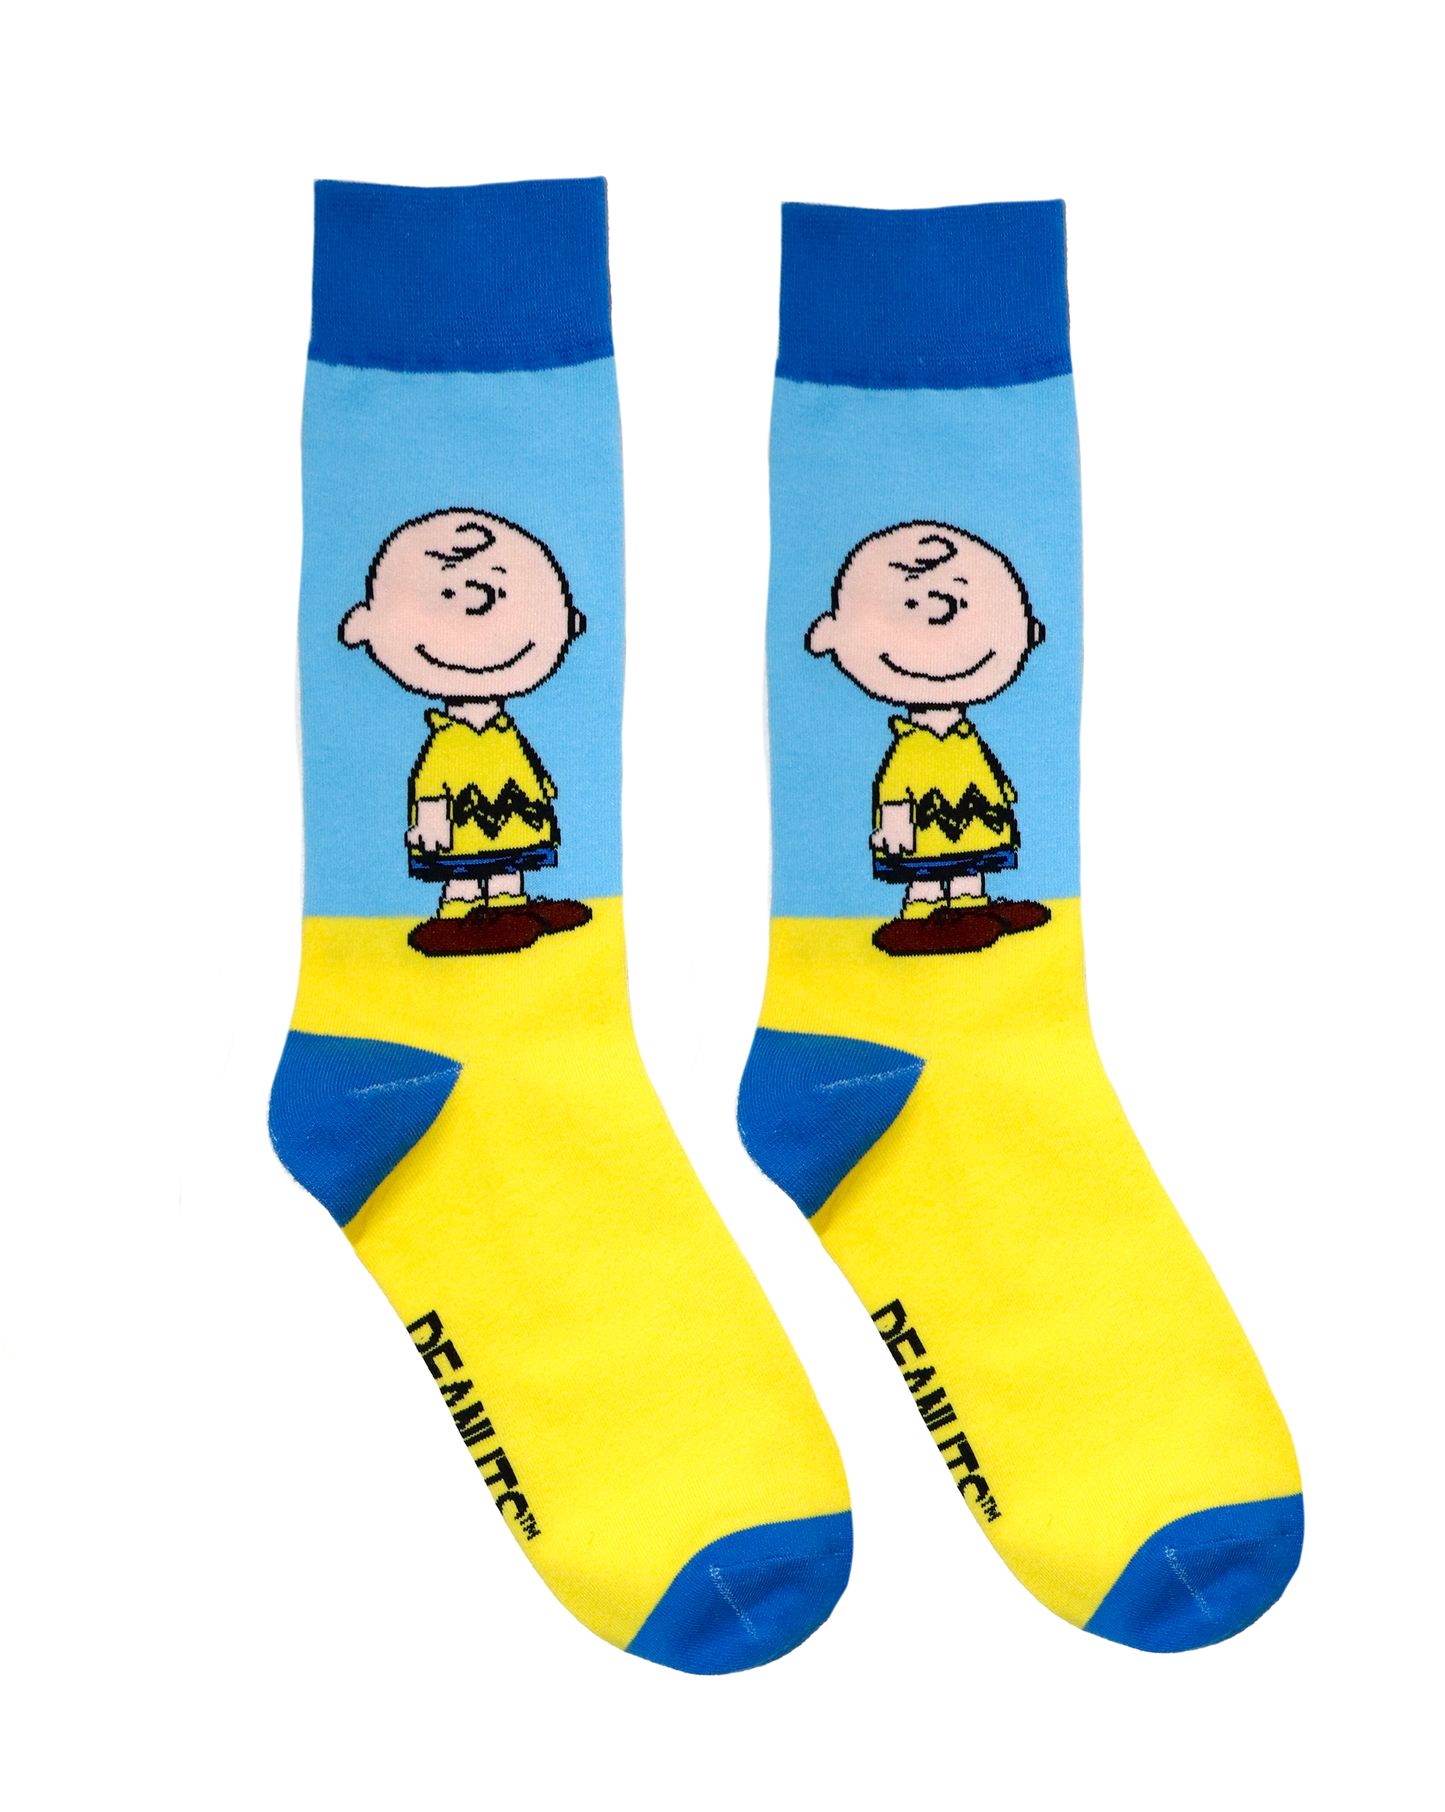 A pair of socks depicting the iconic Charlie Brown. Blue and Yellow legs, dark blue cuff, heel and toe.